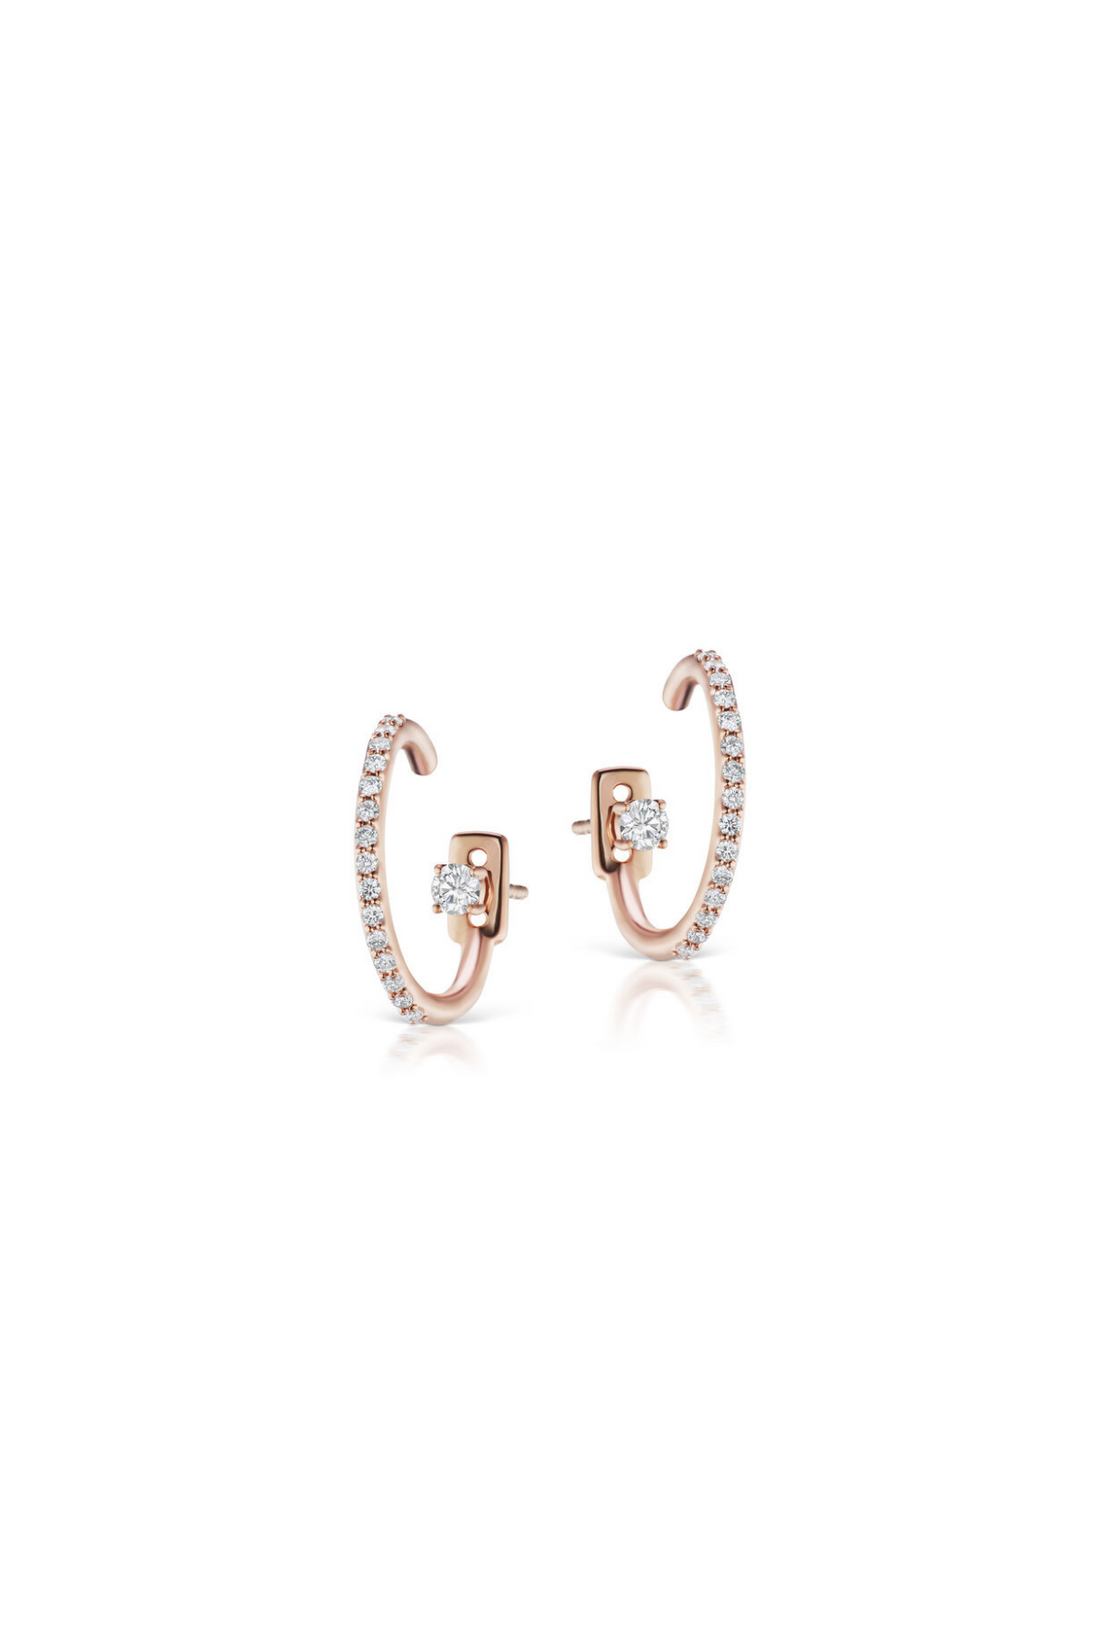 ALTRUIST Pave Montaigne Earring